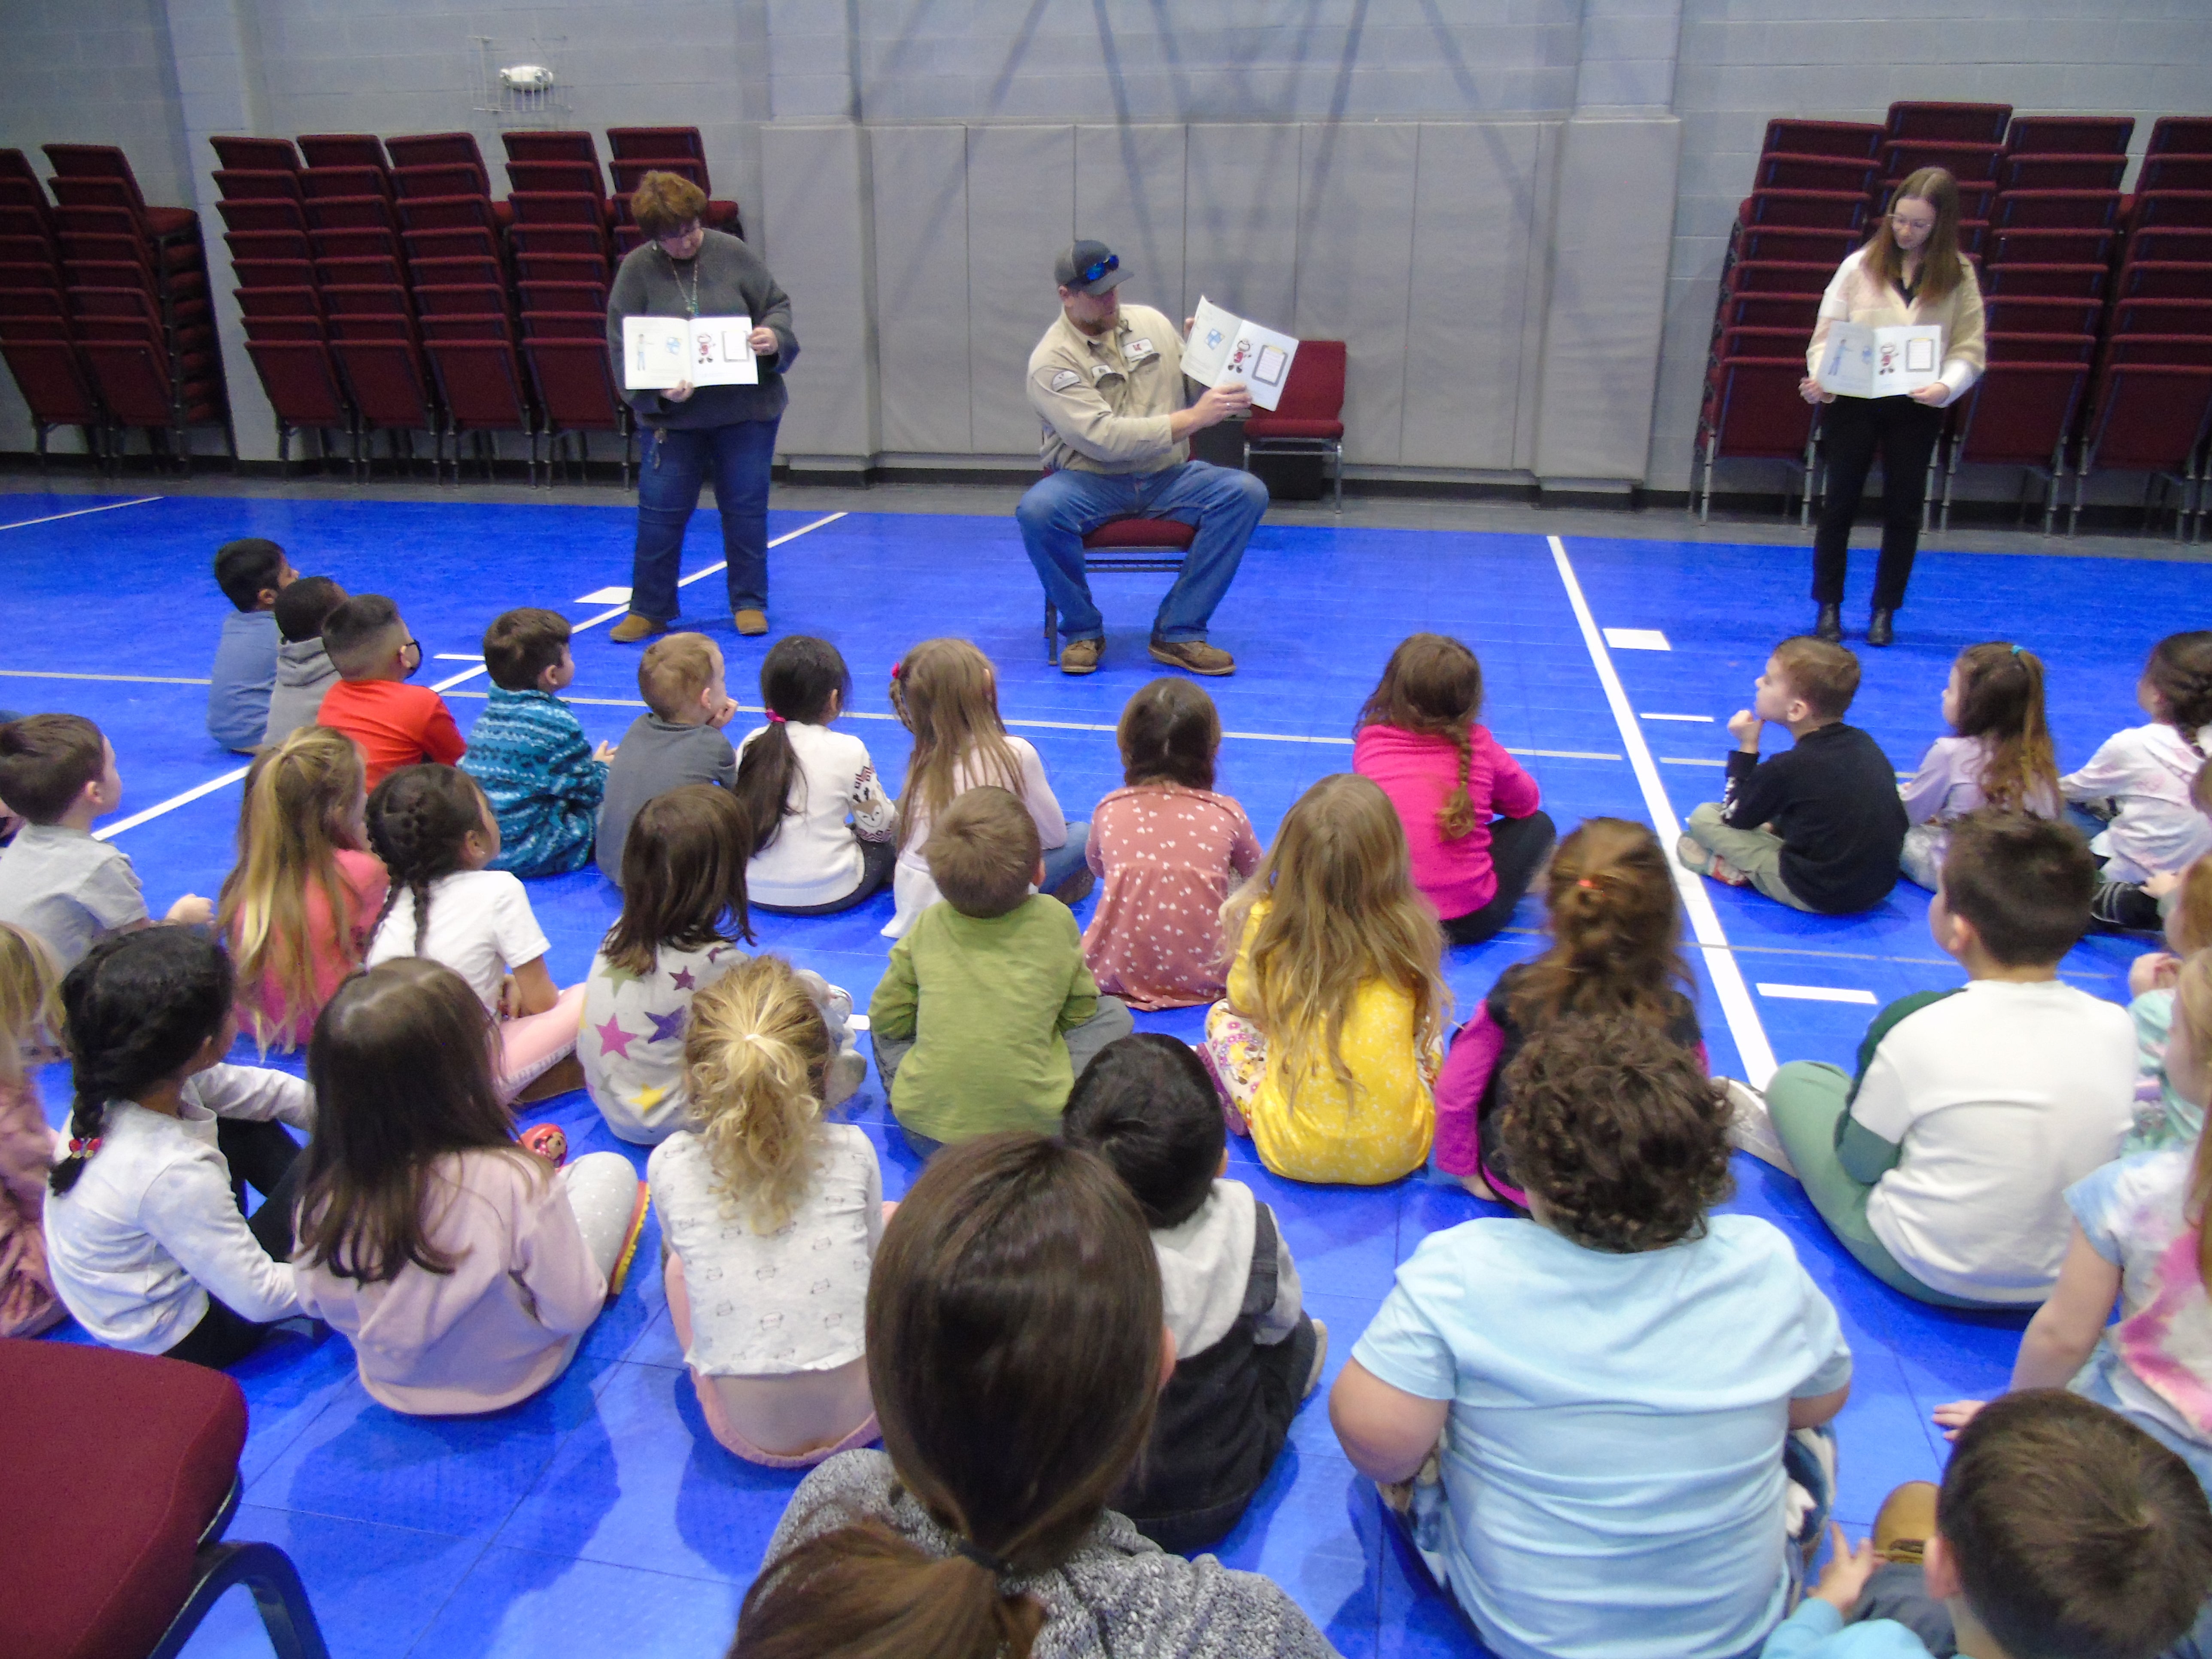 Lineman reading picture book to preschoolers in Presby gym